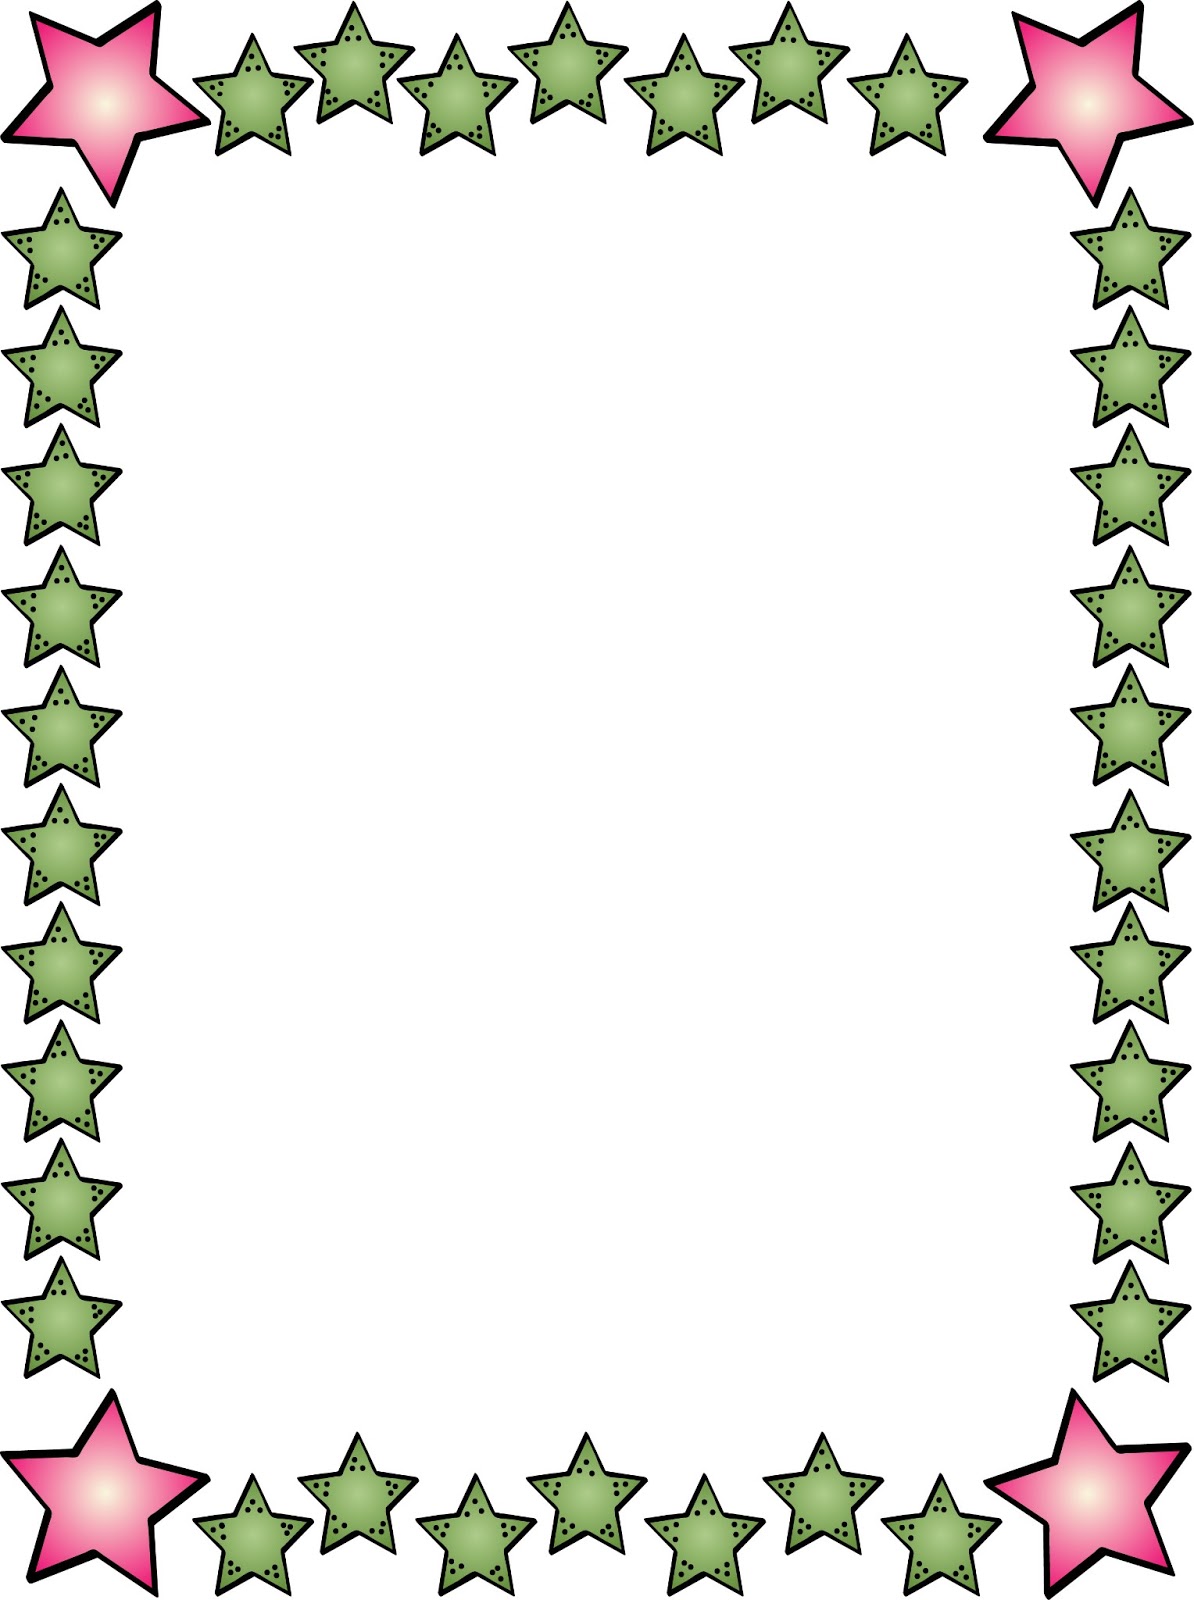 10 Star Borders And Frames Free Cliparts That You Can Download To You